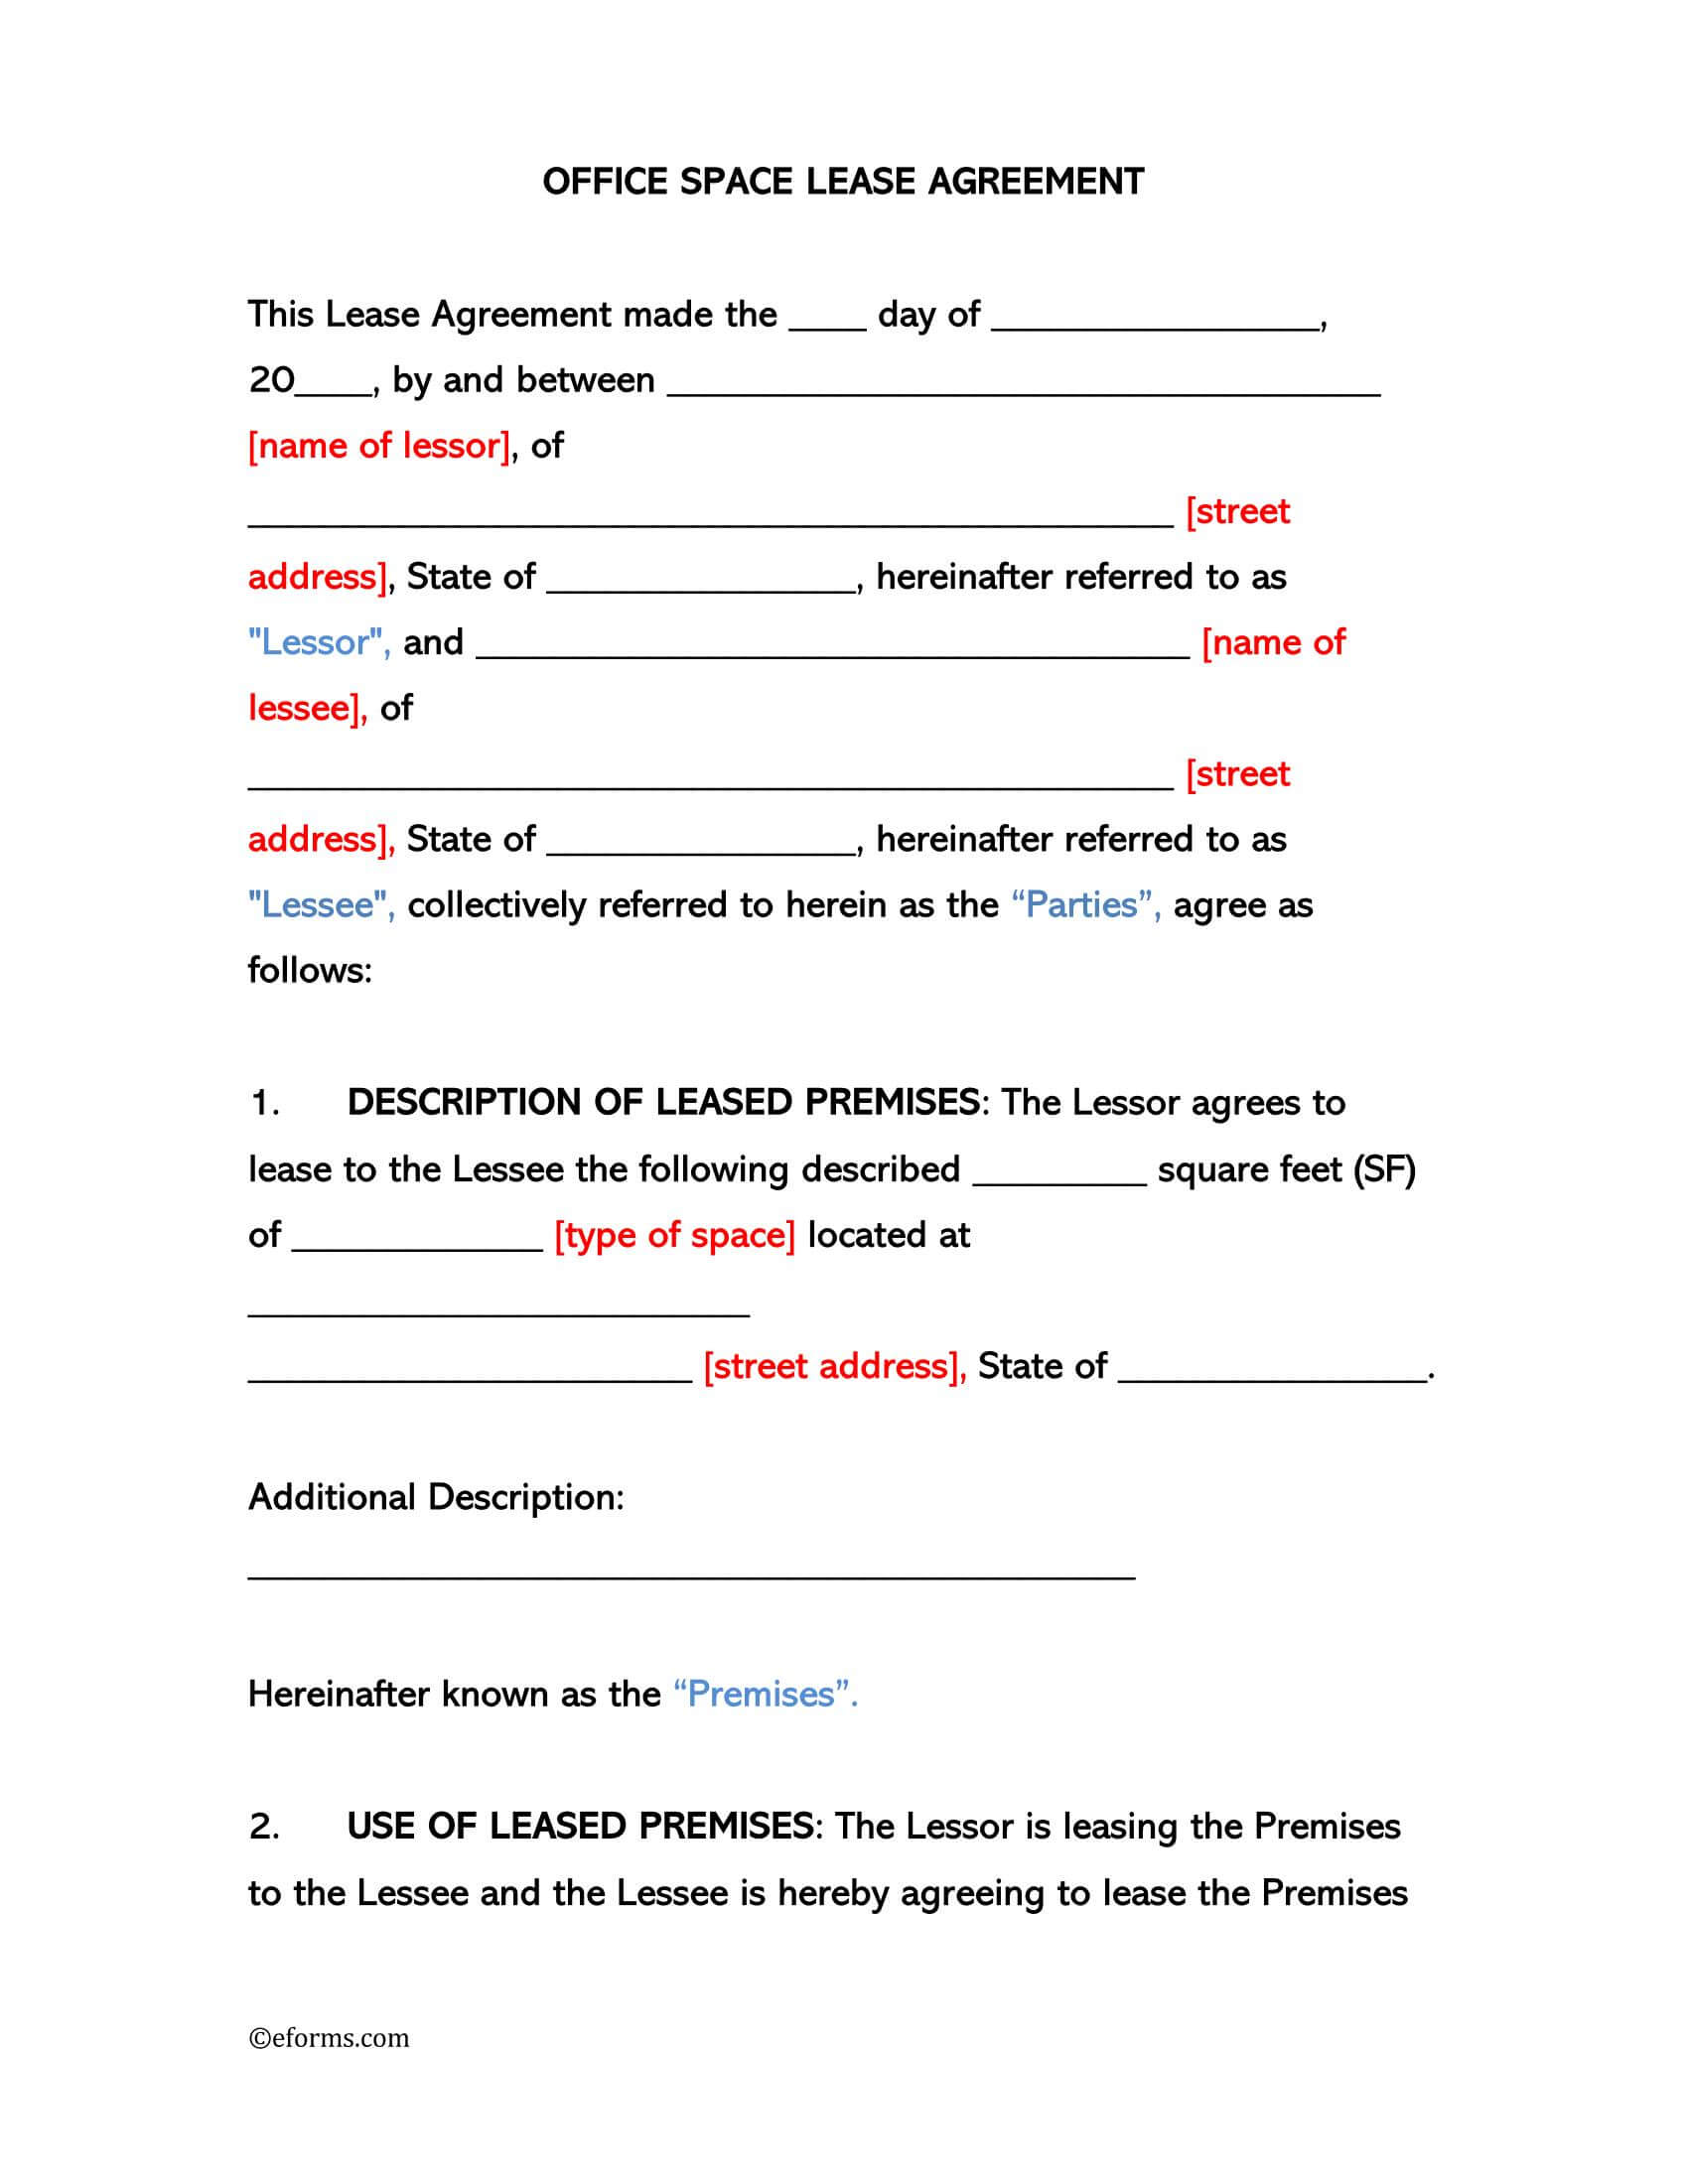 Free Commercial Office Space Lease Agreement Template